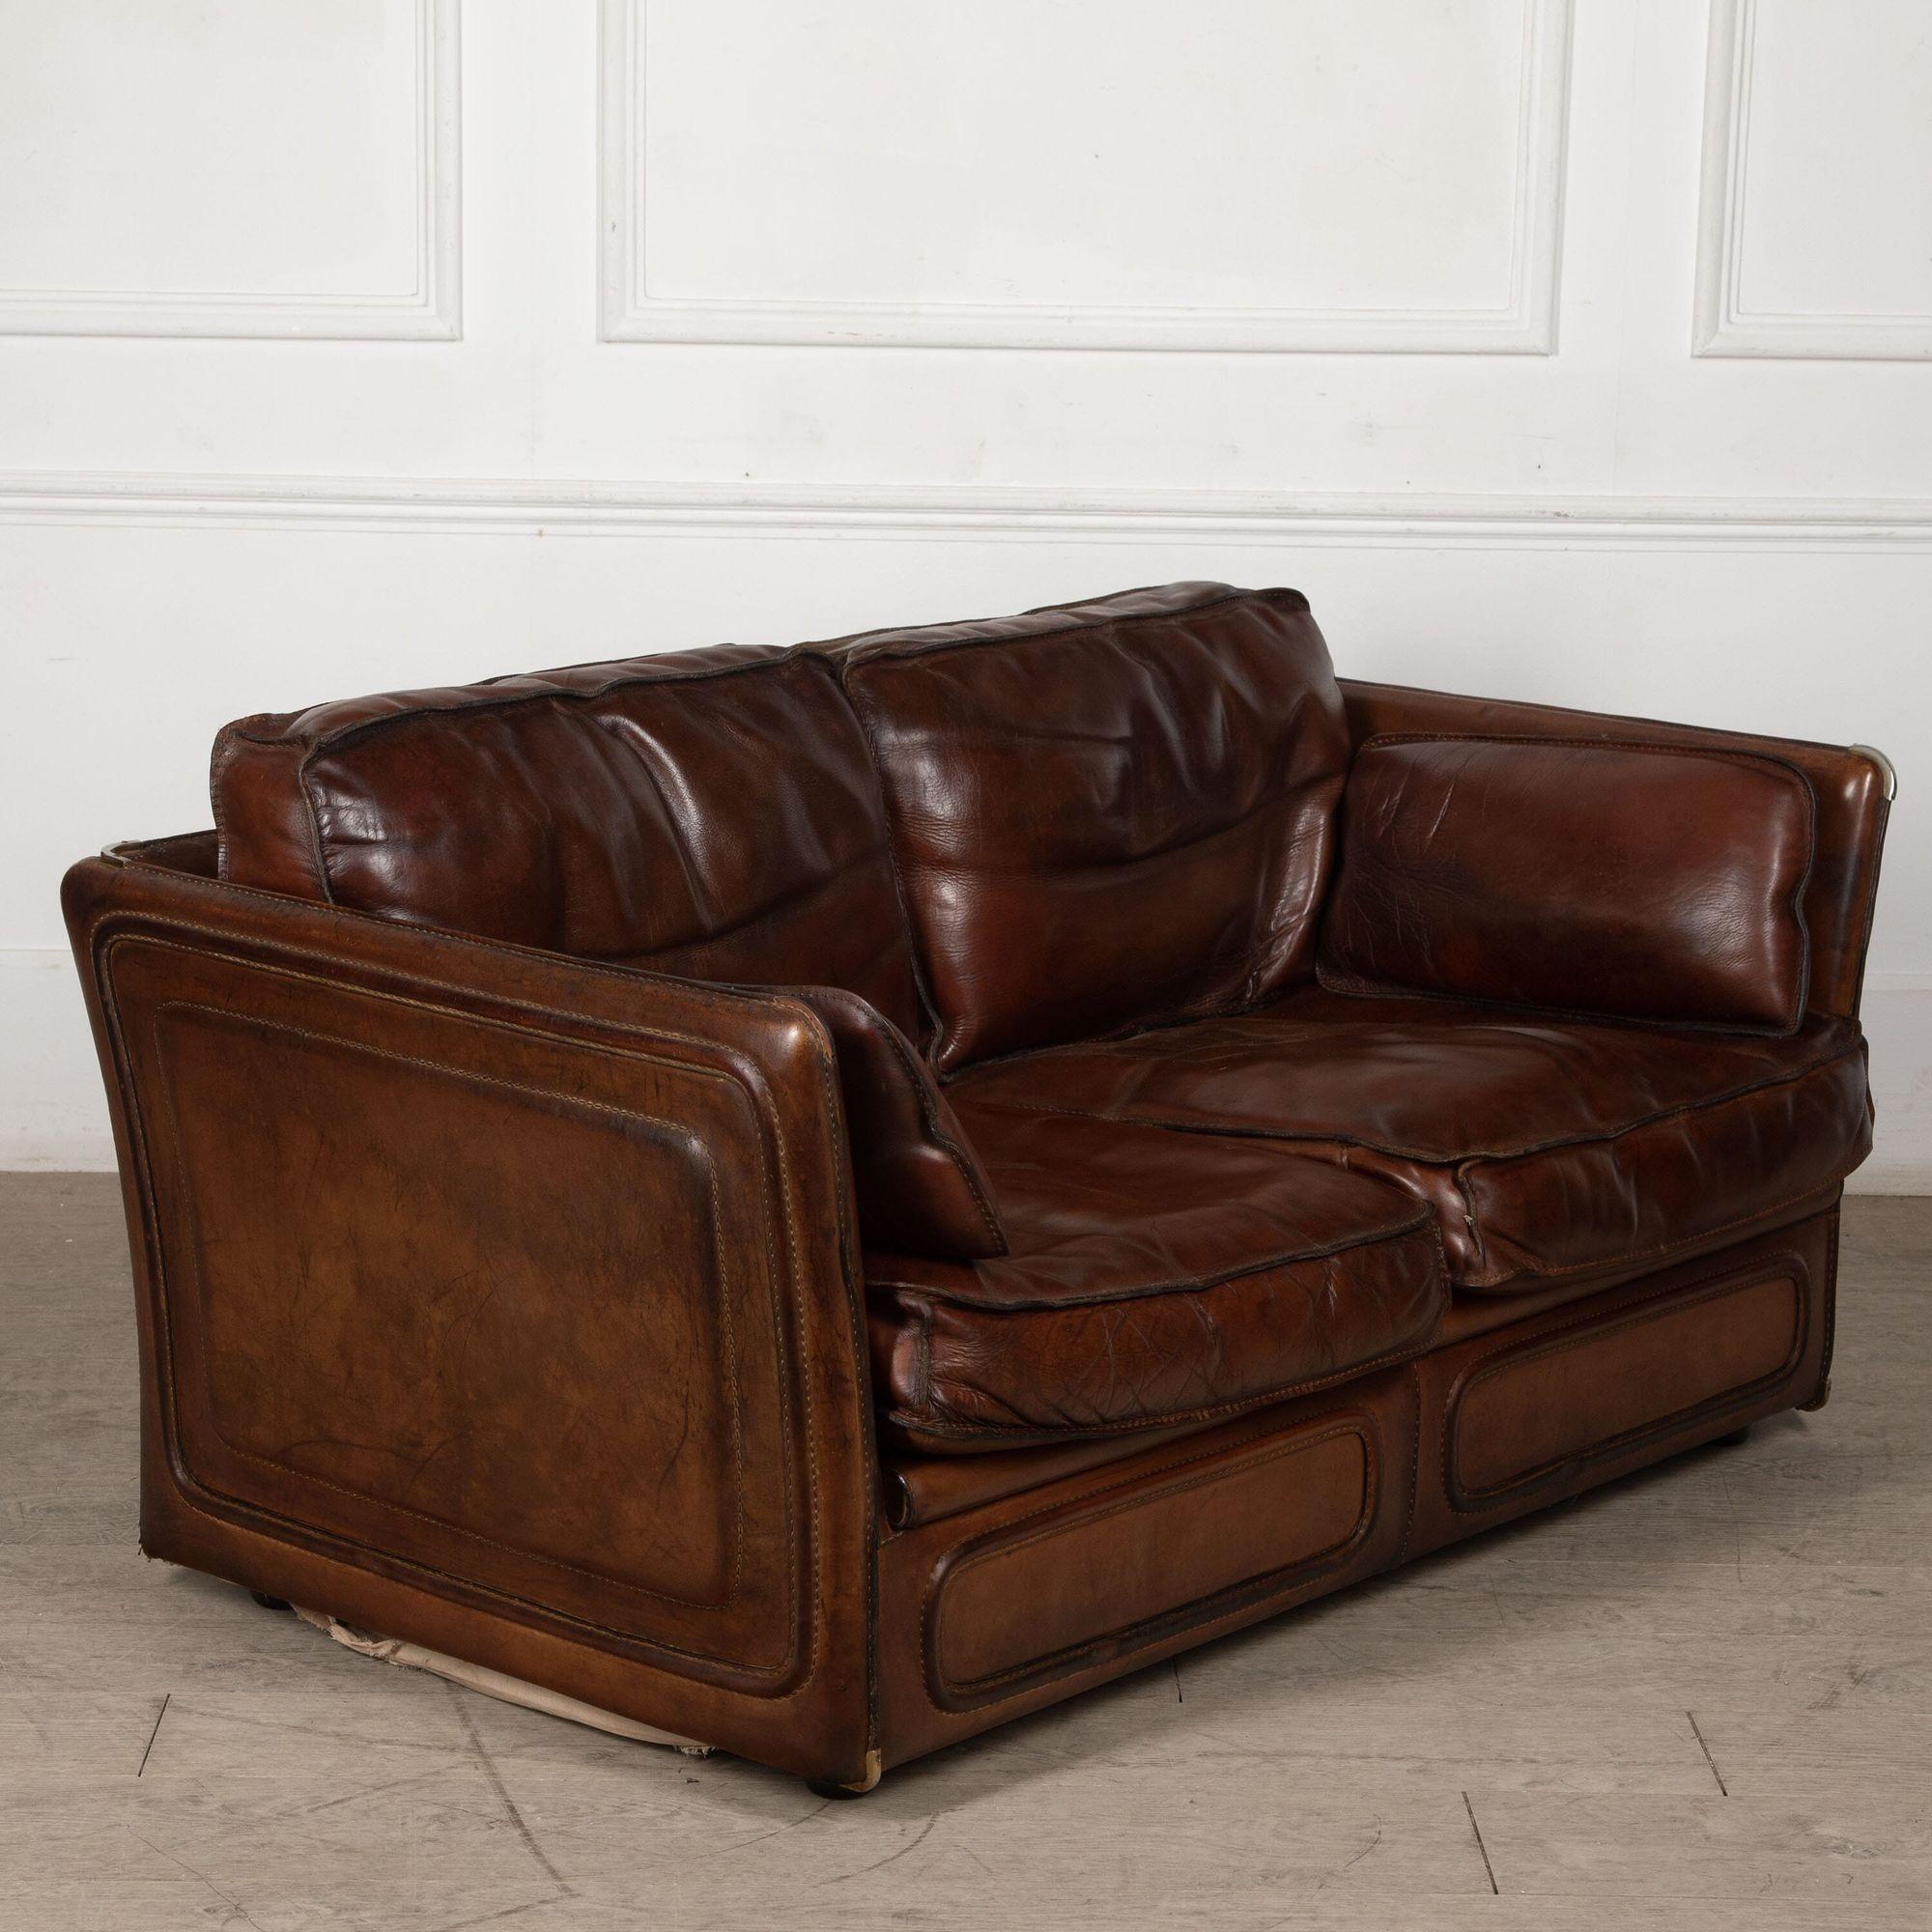 Roche Bobois Saddle Leather Sofa After Hermes In Good Condition For Sale In Gloucestershire, GB